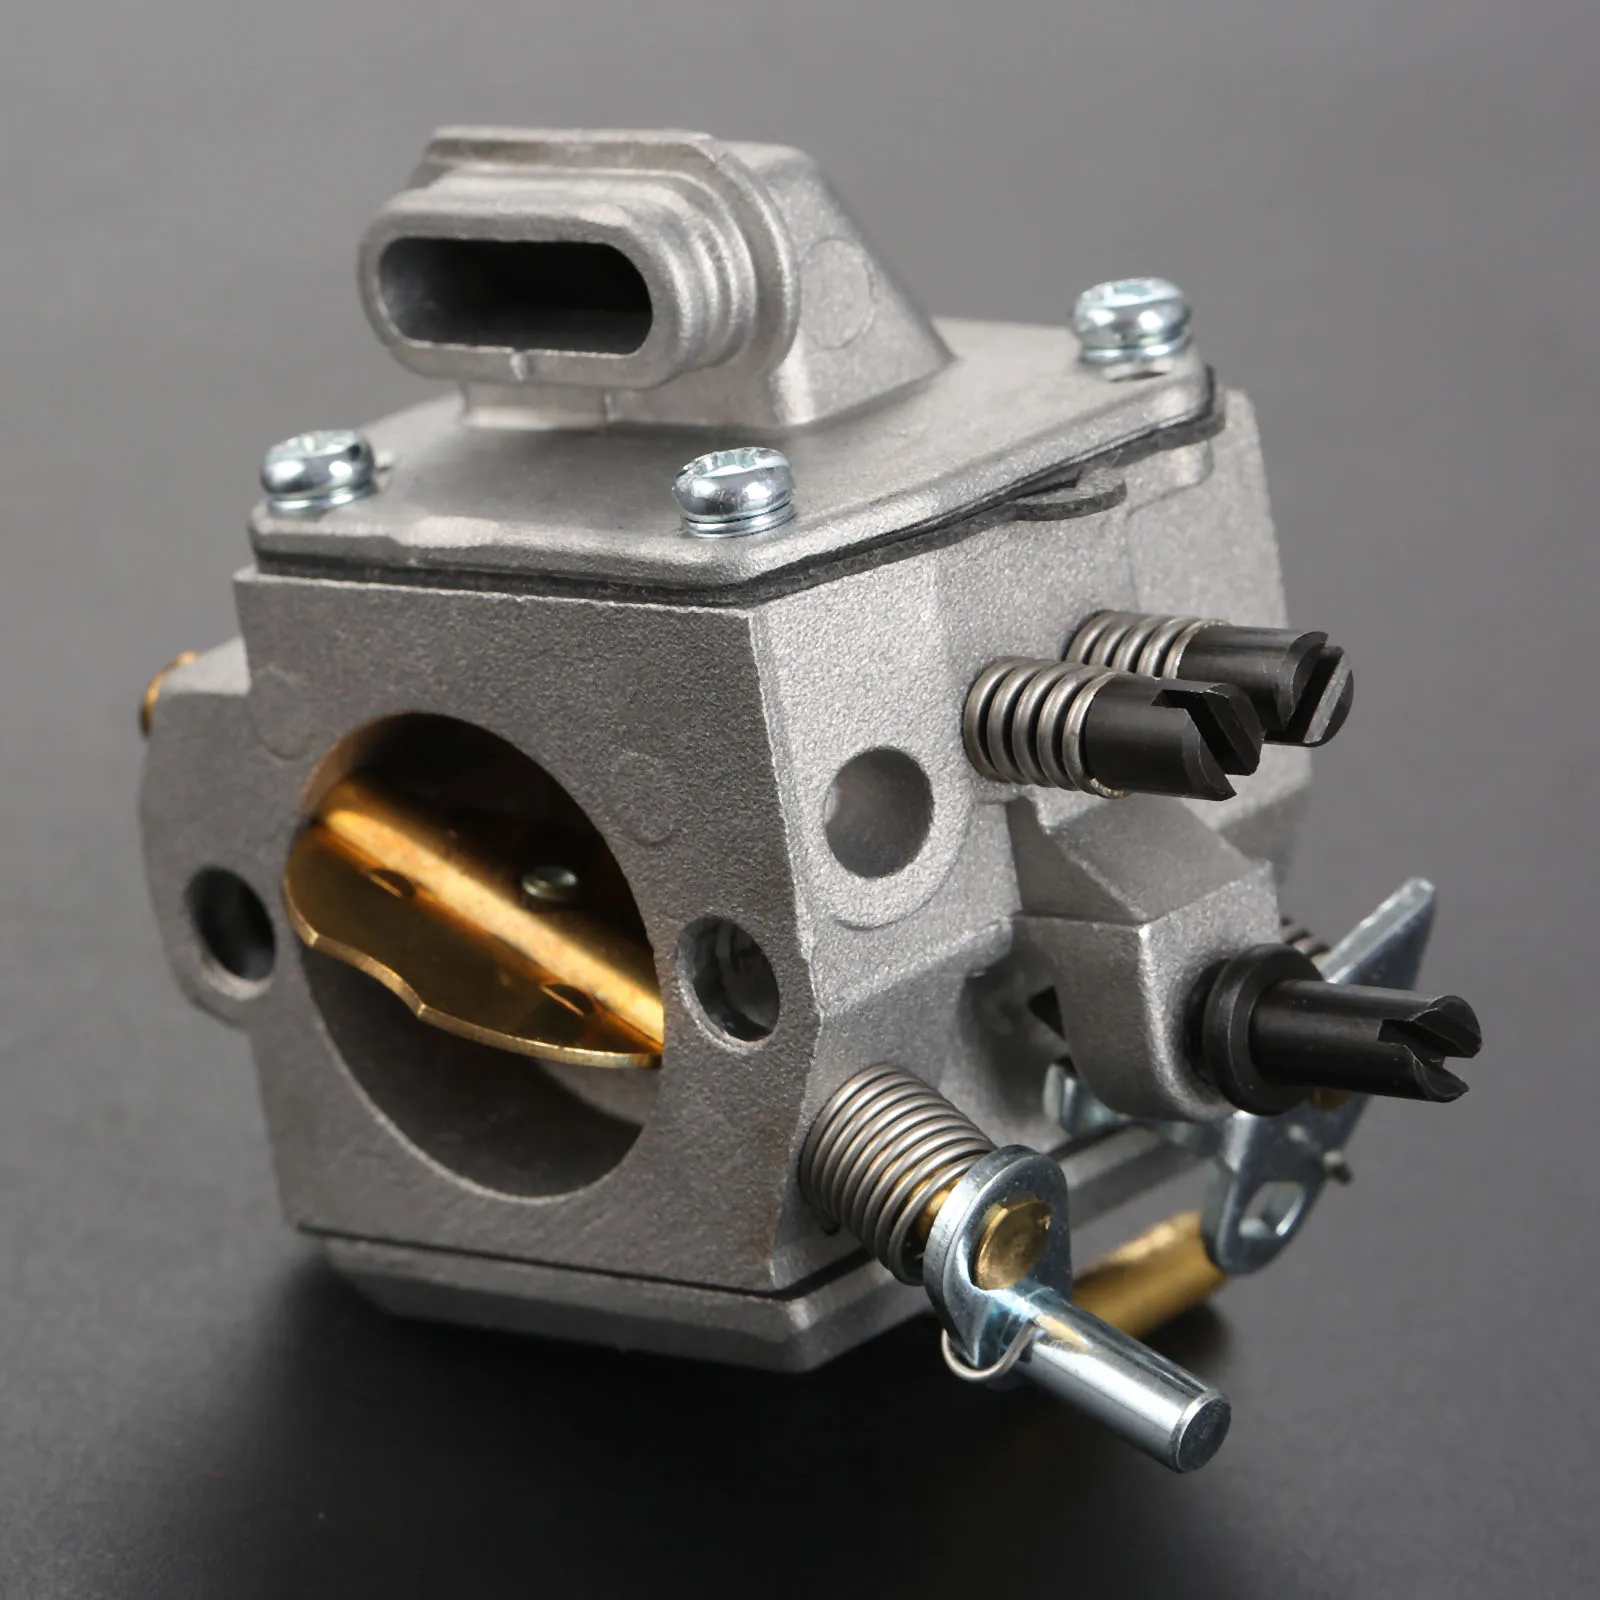 

Chain Saw Carburetor Carb For STIHL 029 039 MS290 MS310 MS390 MS 290 310 390 Chainsaw Spare Parts Replace# 1127 120 0650